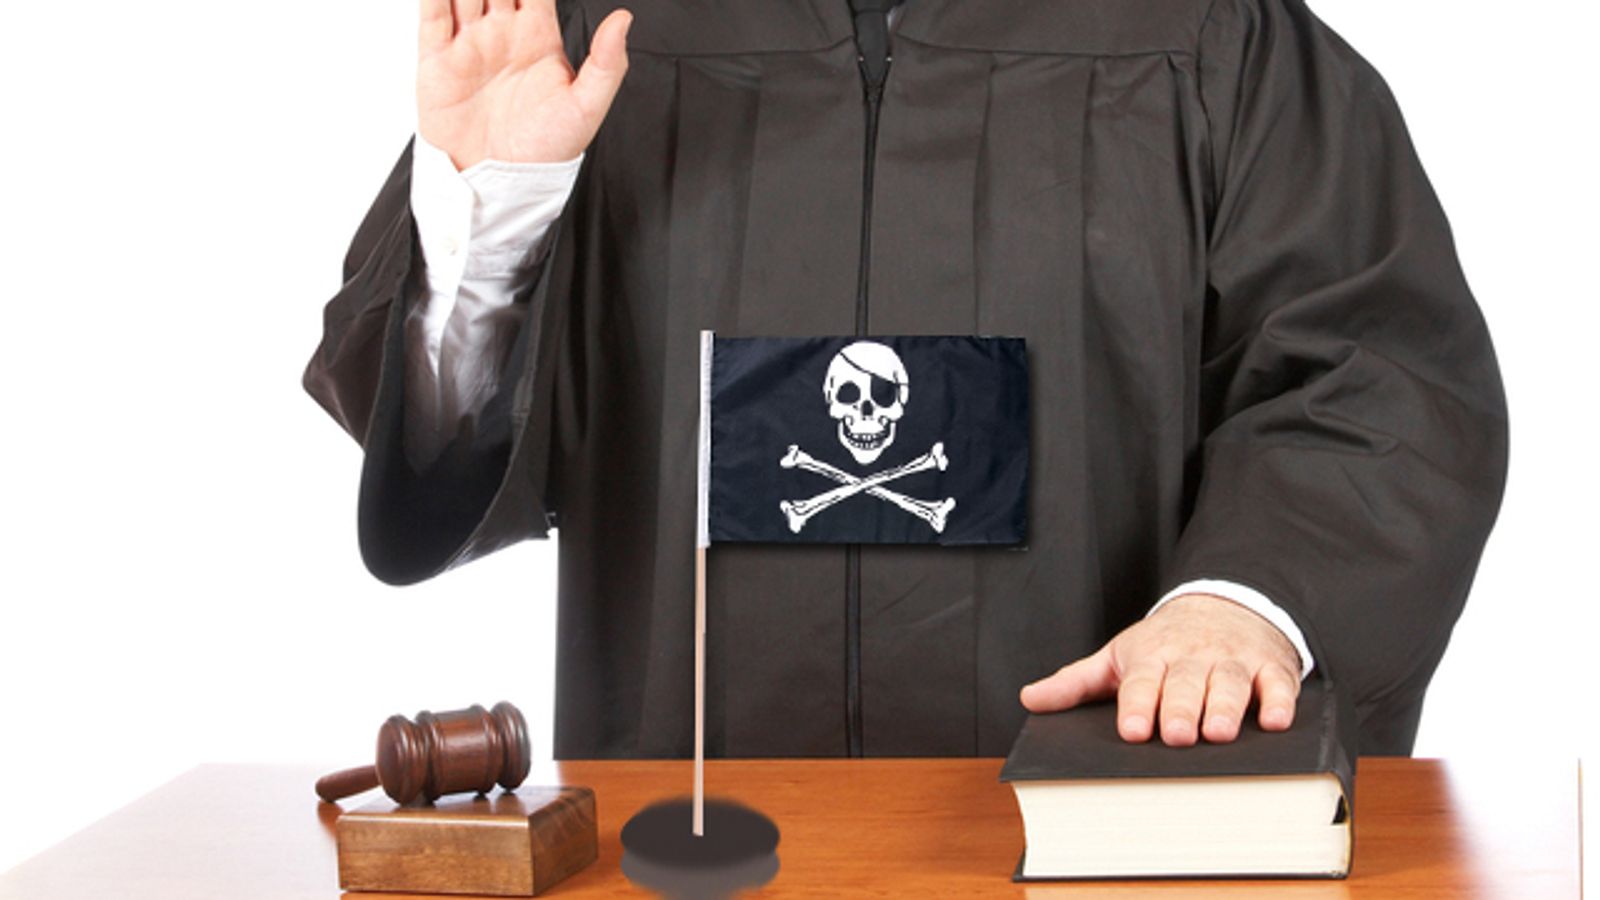 Pirate Bay Trial Judge Not Biased, Court Claims